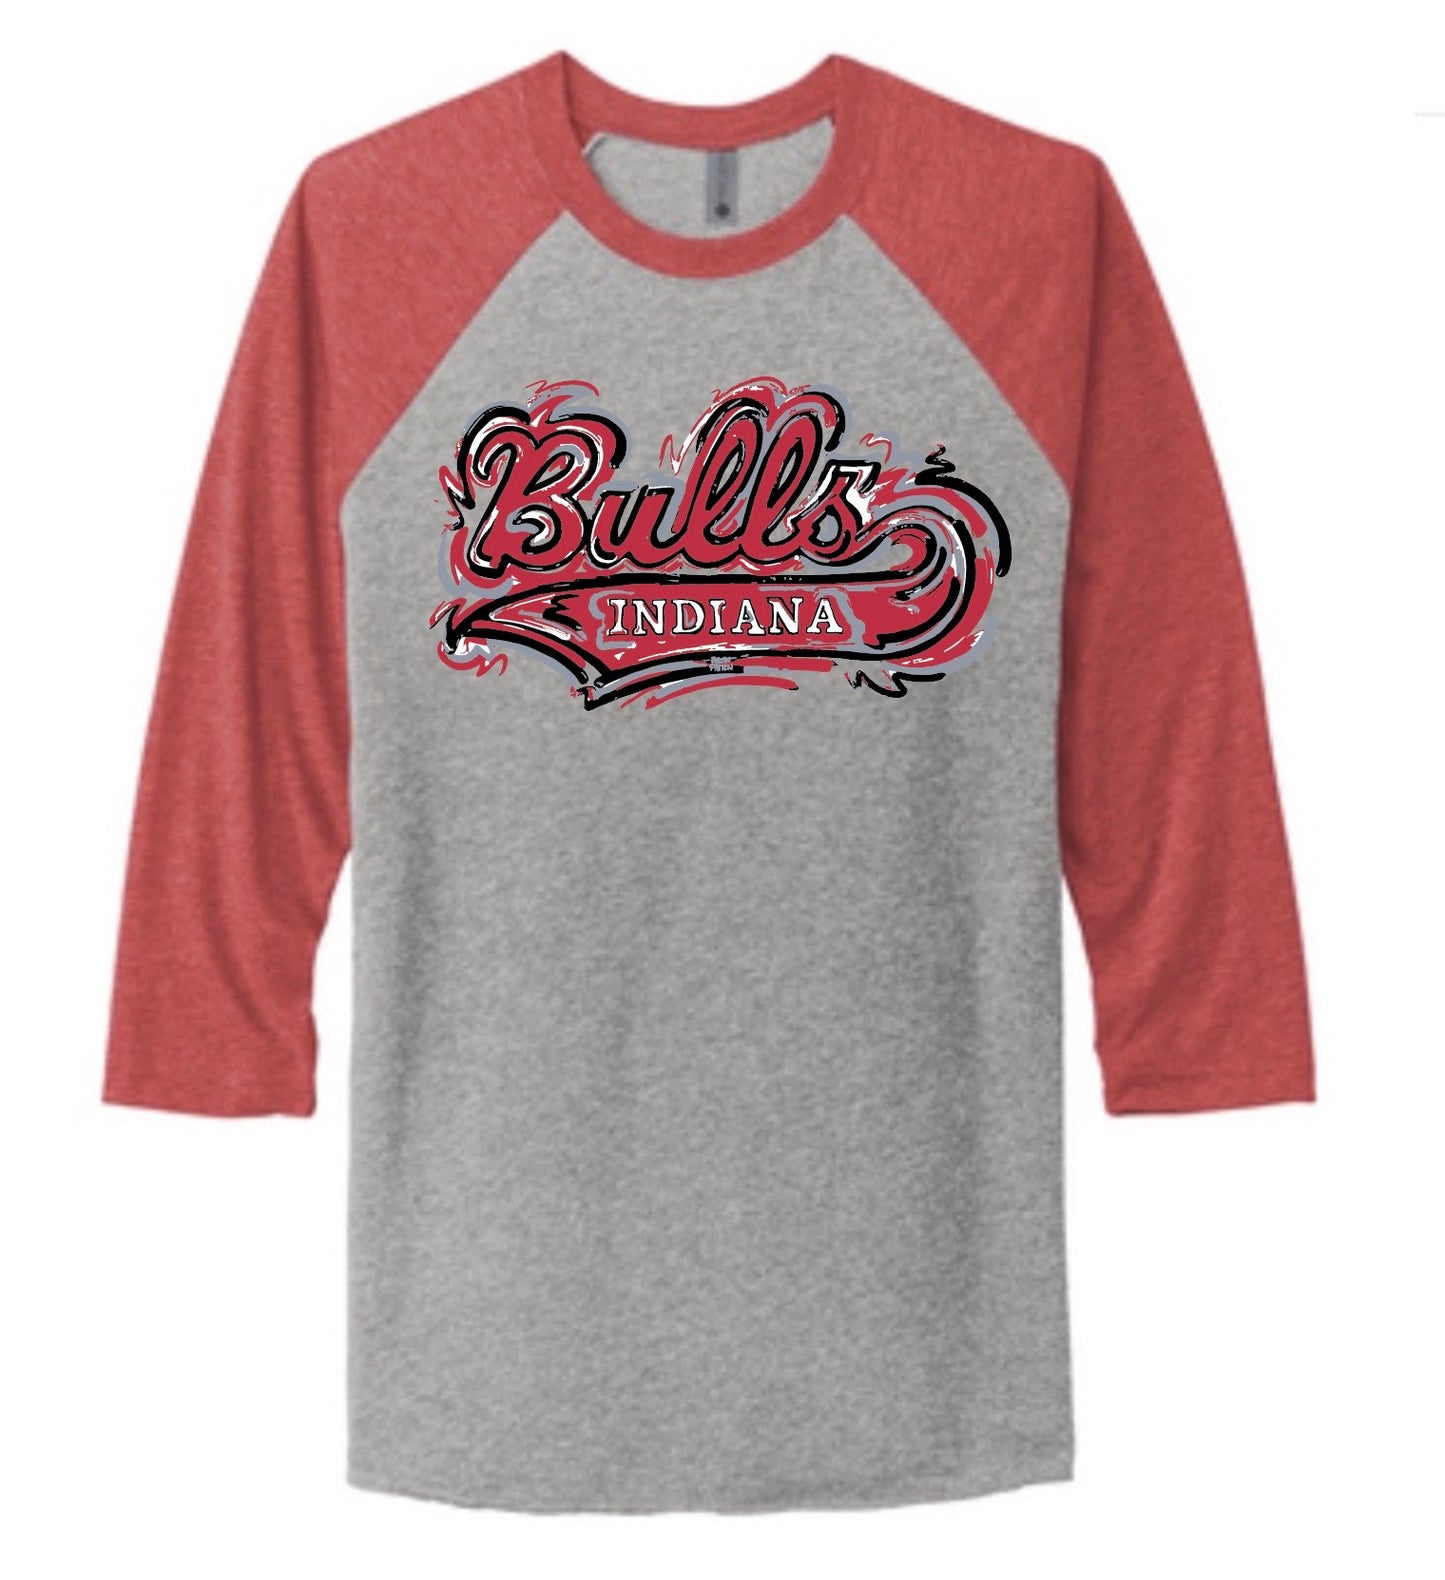 Indiana Bulls 3/4 Sleeve Unisex Tee by Justin Patten (2 Colors)